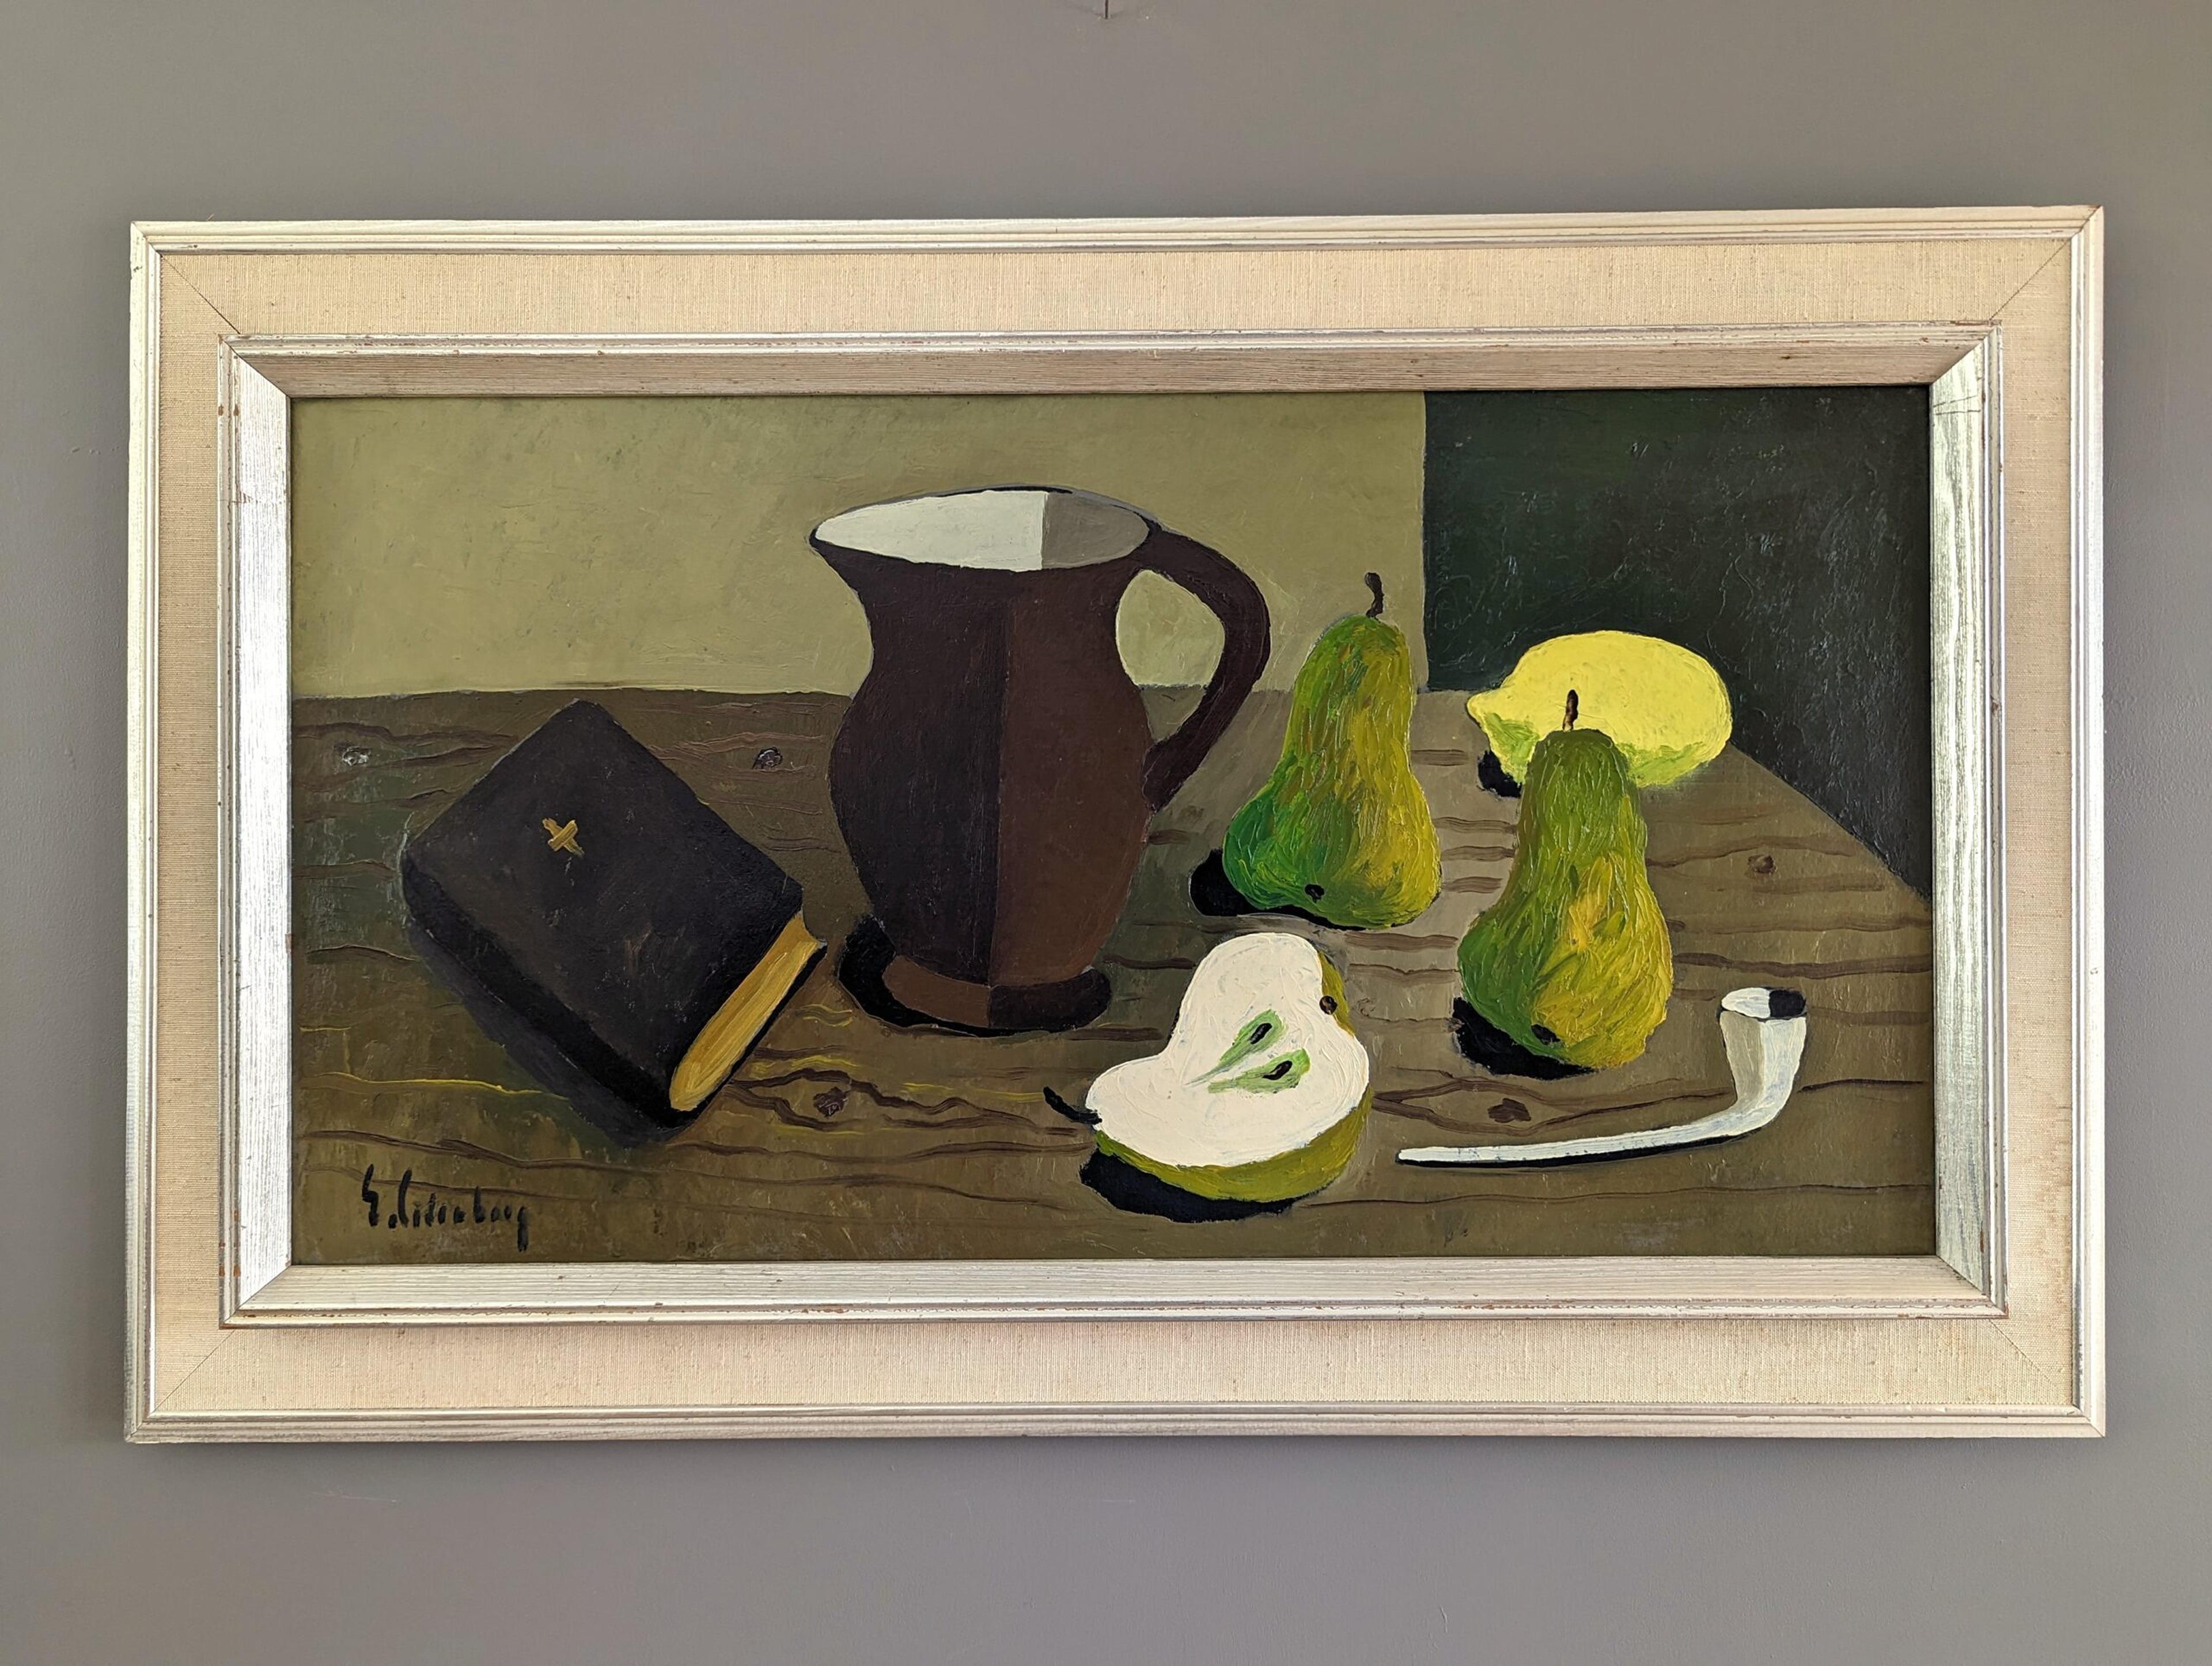 PIPE & PEARS
Size: 49.5 x 79.5 cm (including frame)
Oil on Board

A brilliantly executed and characterful mid-century still life in oil, painted by the established Swedish artist Eric Cederberg (1897-1984), whose artworks have been represented in